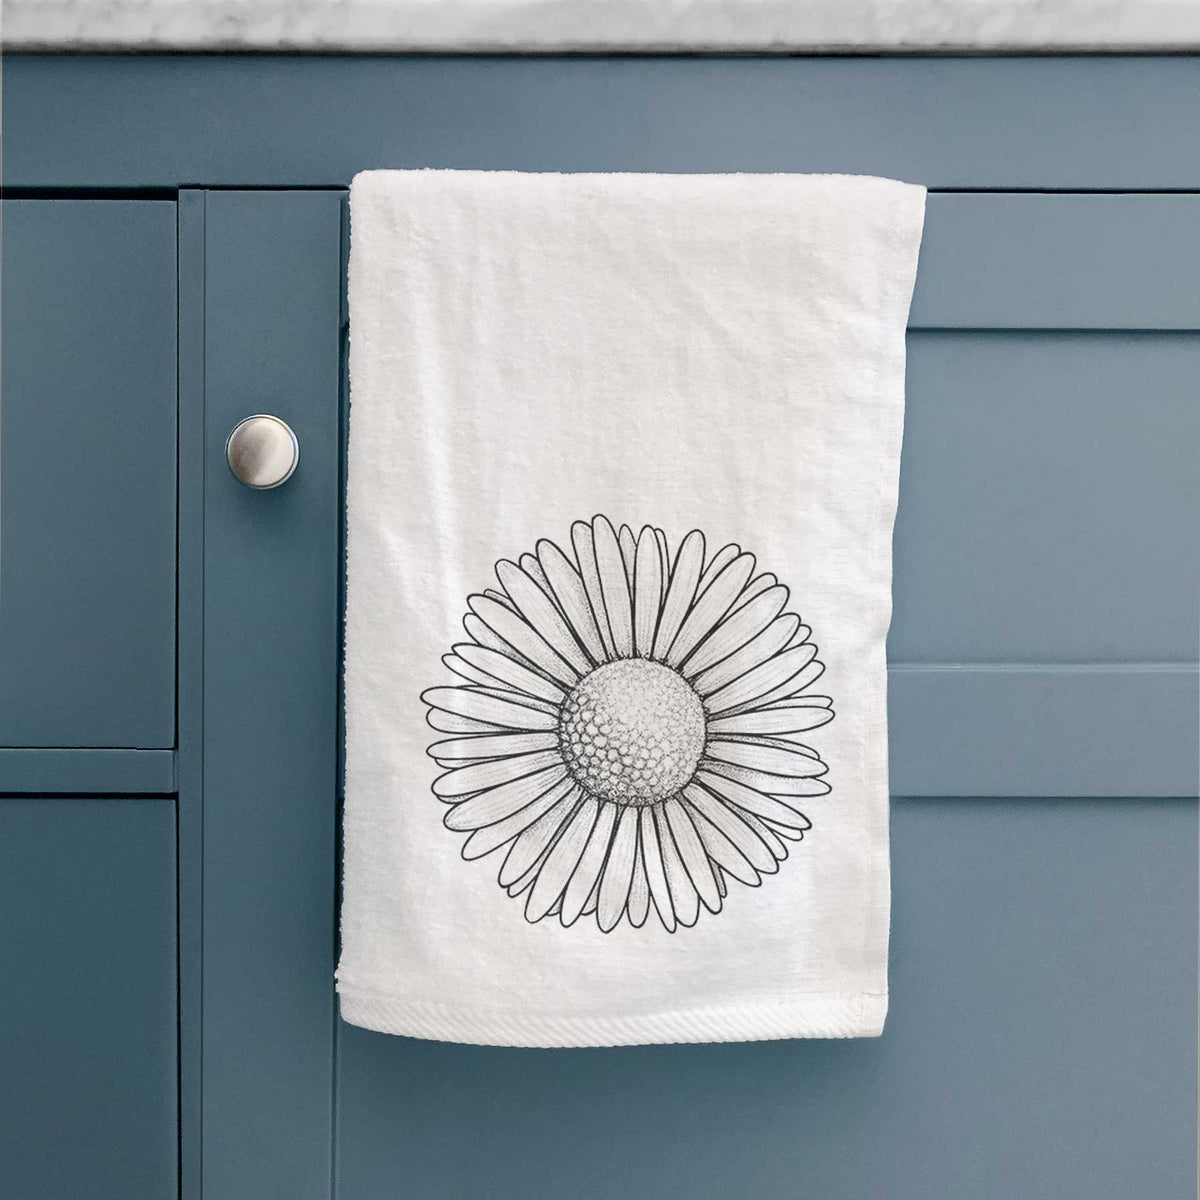 Bellis perennis - The Common Daisy Hand Towel